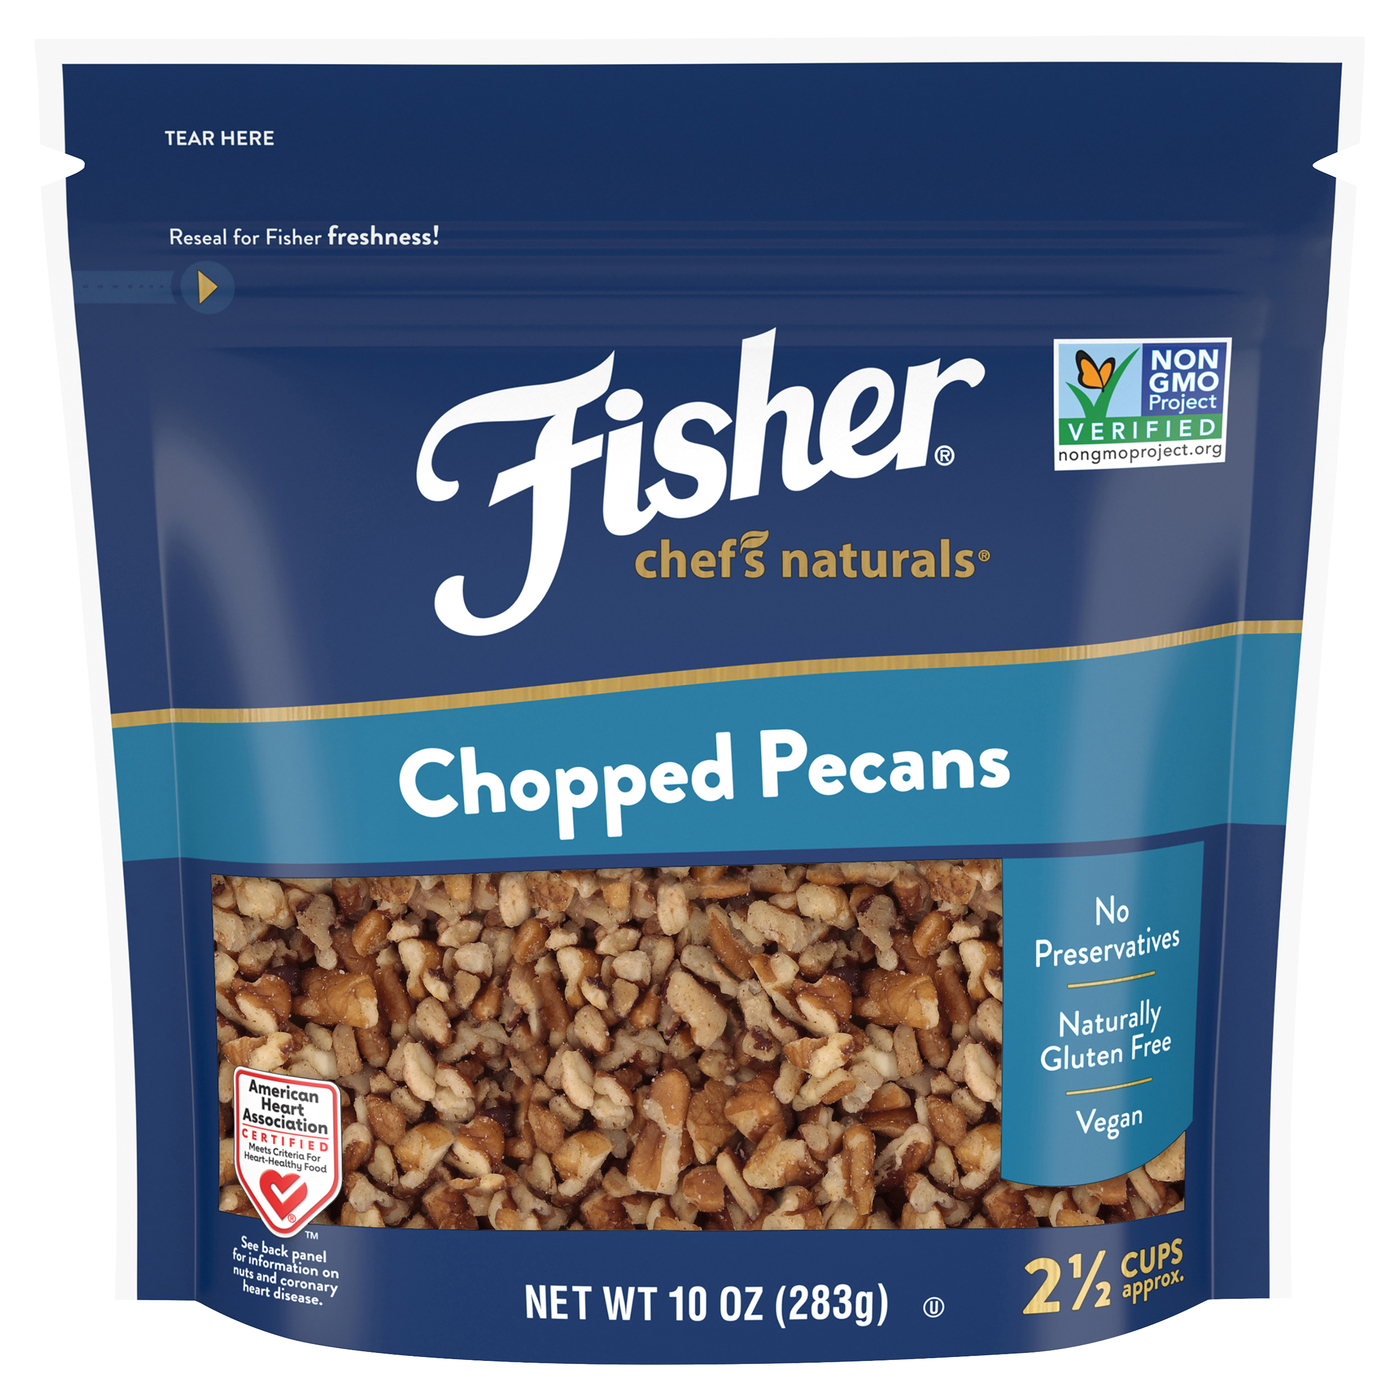 Fisher Chef's Naturals Gluten Free, No Preservatives, Non-GMO Chopped Pecans, 10 oz Bag - image 1 of 10